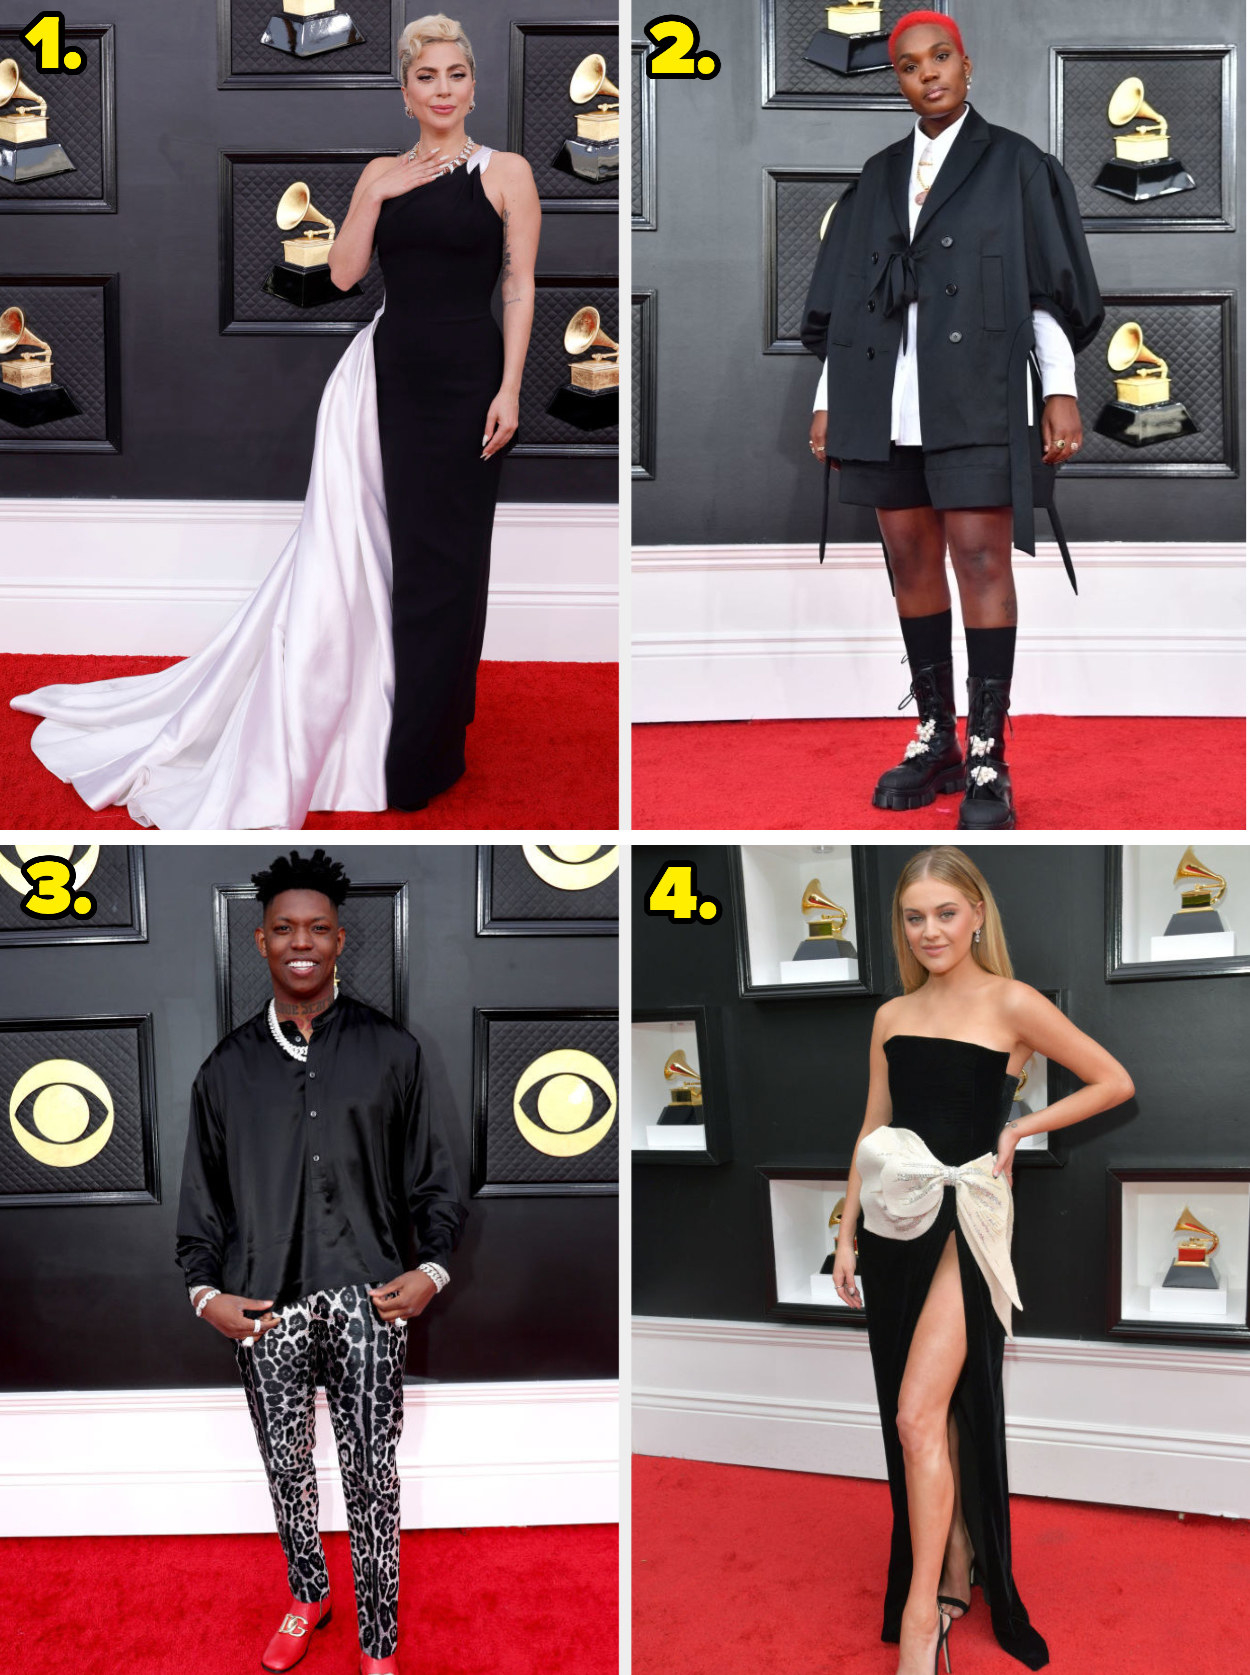 1. A one-shouldered gown with a colorblock skirt. 2. A button-down shirt with a cape and shorts, worn with combat boots. 3. A silk button-down shirt worn with animal print pants. 4. A strapless gown with a thigh slit and a giant bow around the waist.